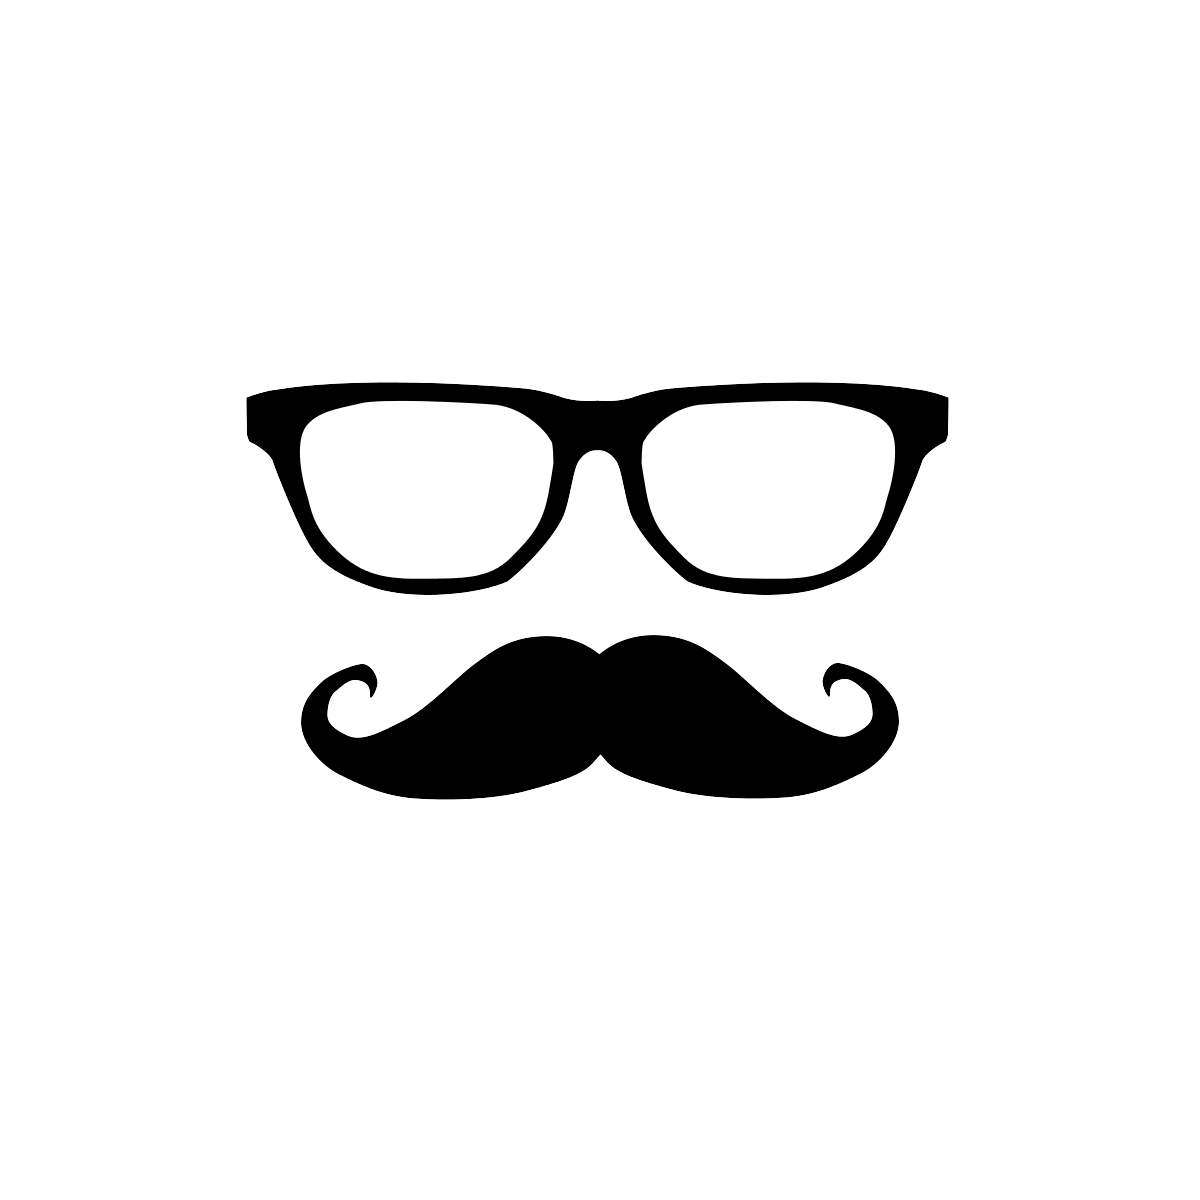 Hipster Glasses and Moustache